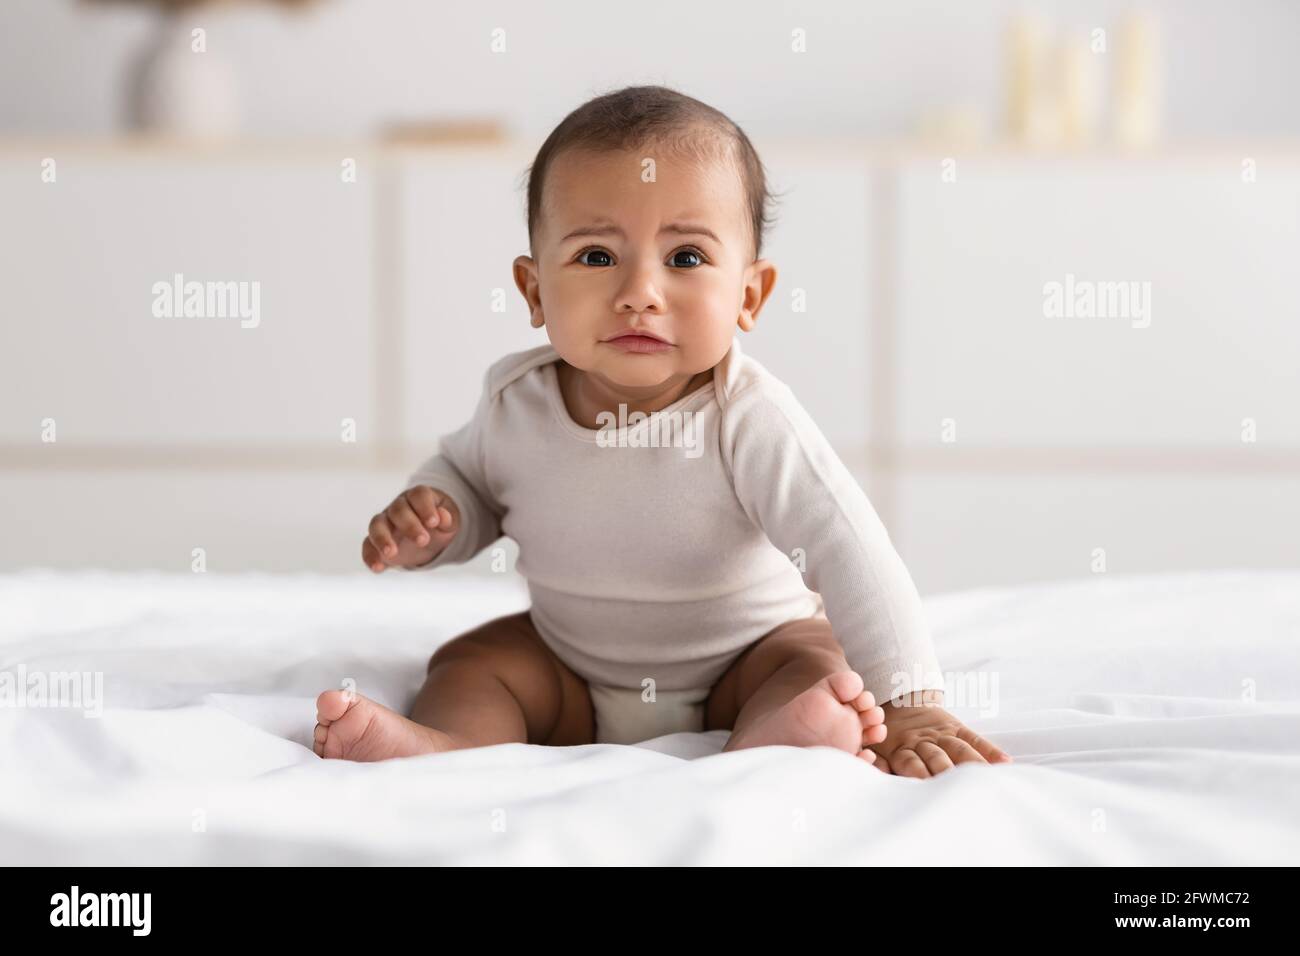 Portrait of sad African American baby crying alone Stock Photo